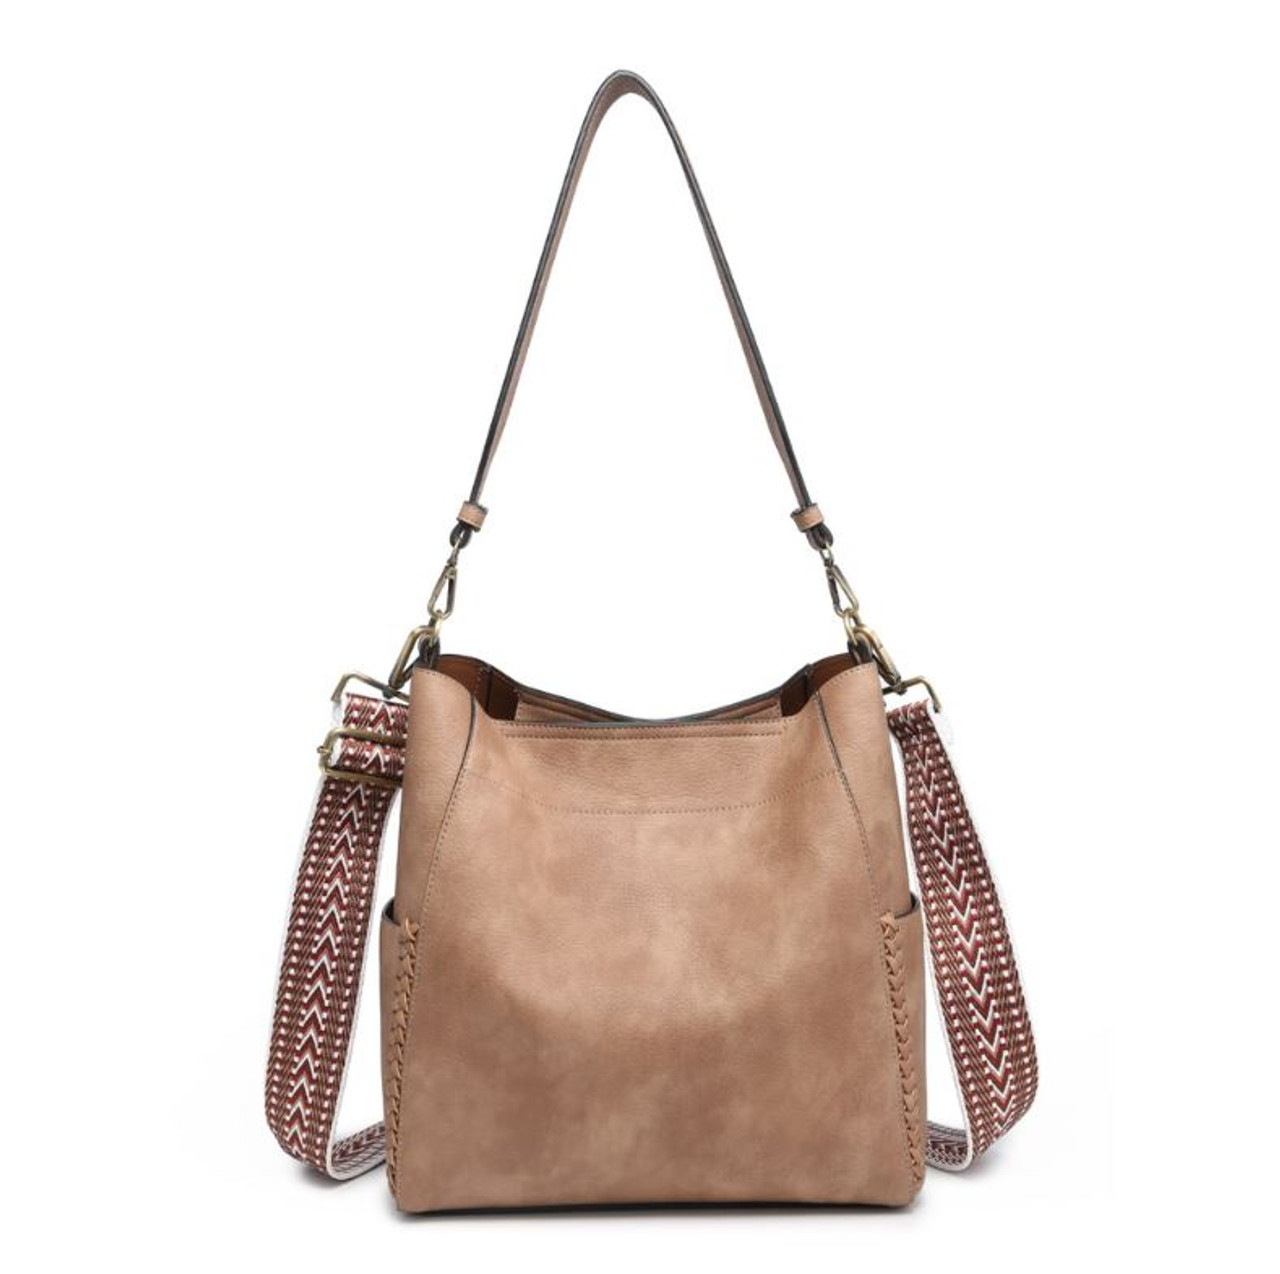 Jen & Co Penny Bucket Bag with Guitar Strap